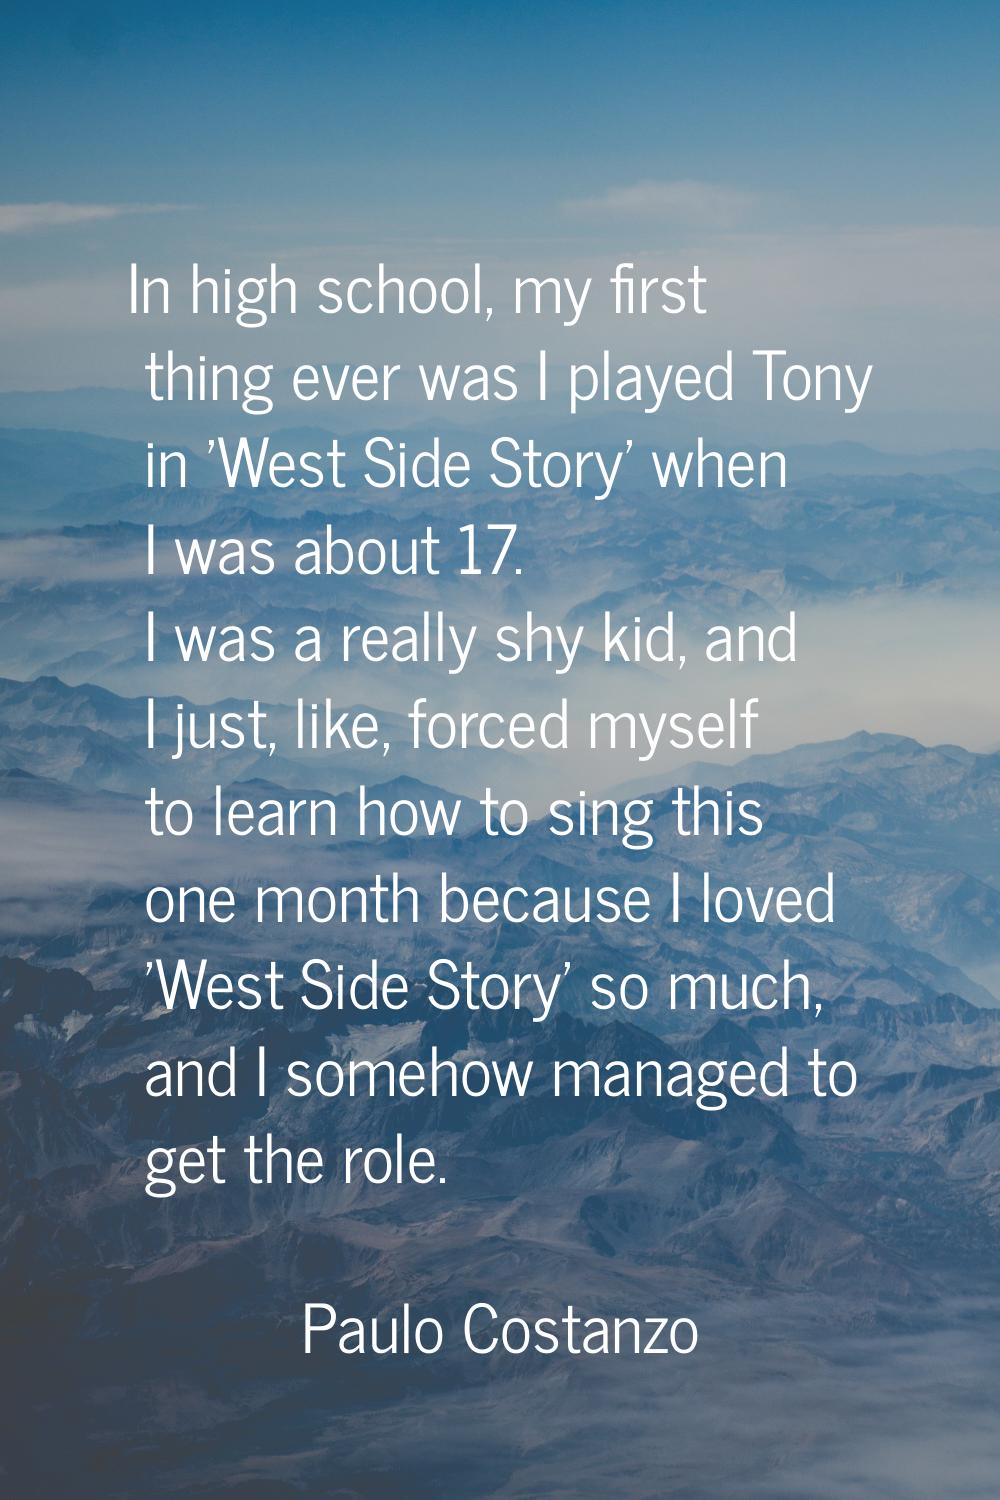 In high school, my first thing ever was I played Tony in 'West Side Story' when I was about 17. I w